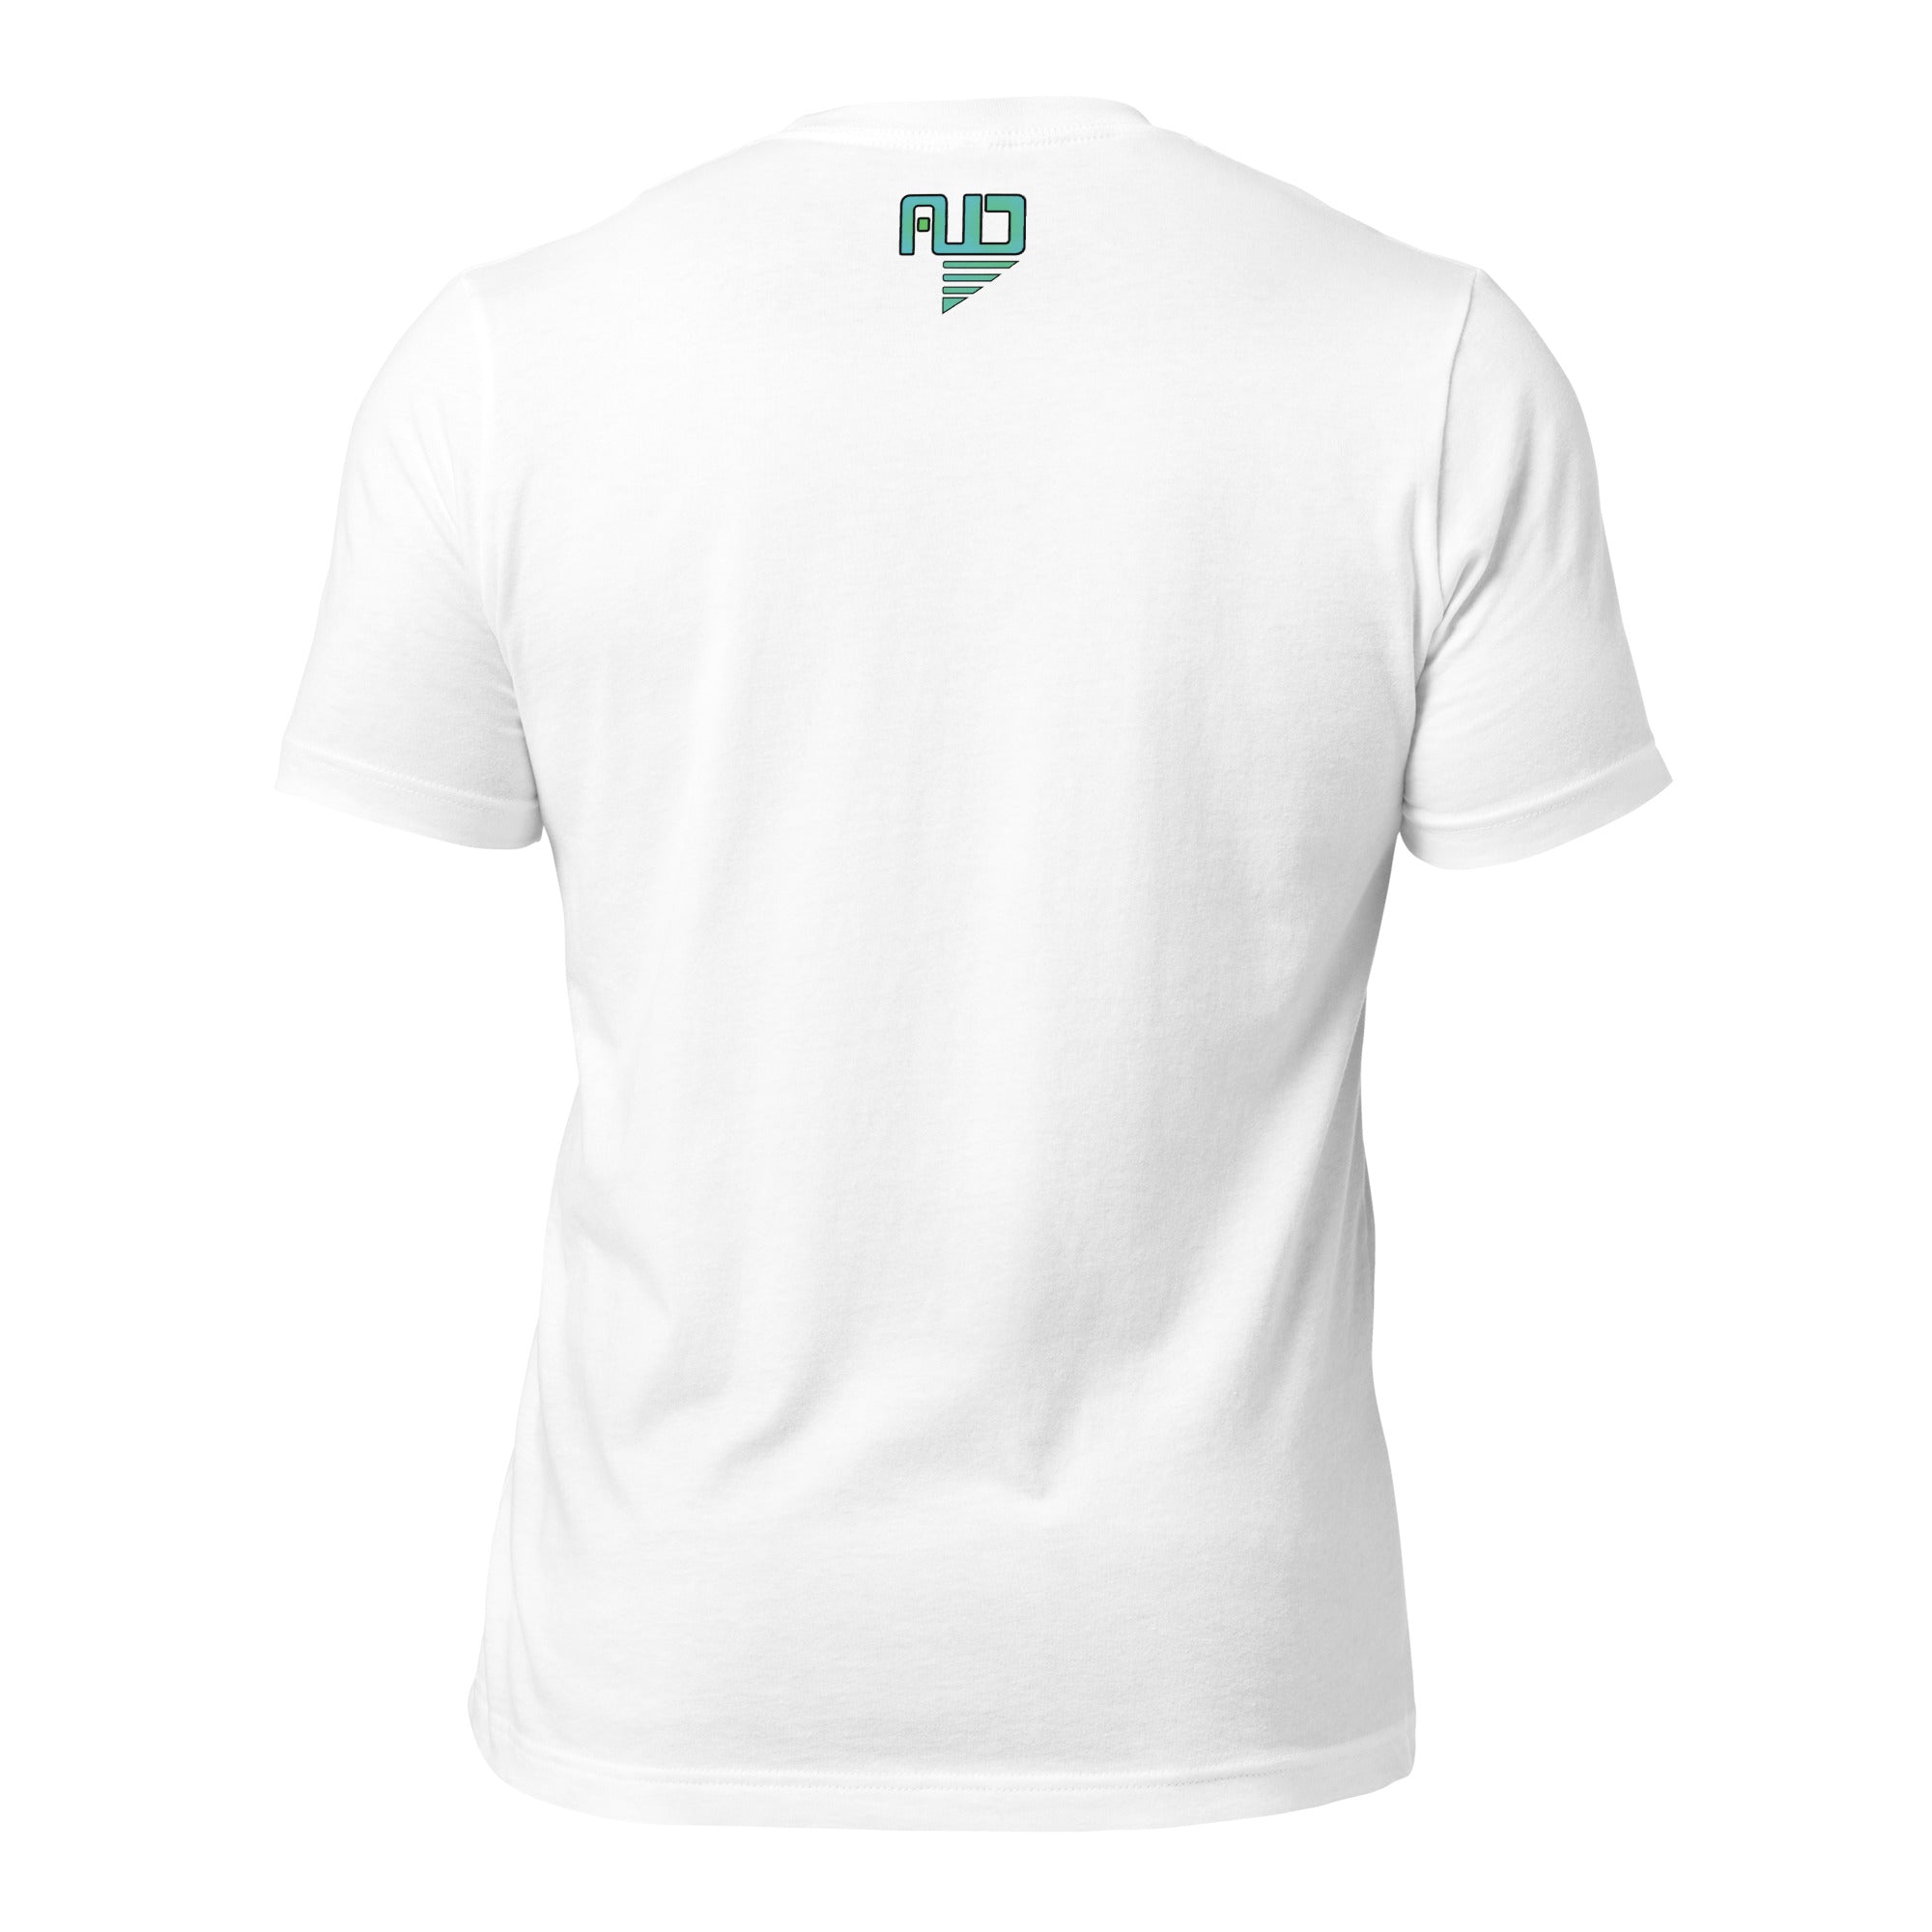 AUD Apparel God 1st Gym 2nd (Embroidery) Unisex T-Shirt